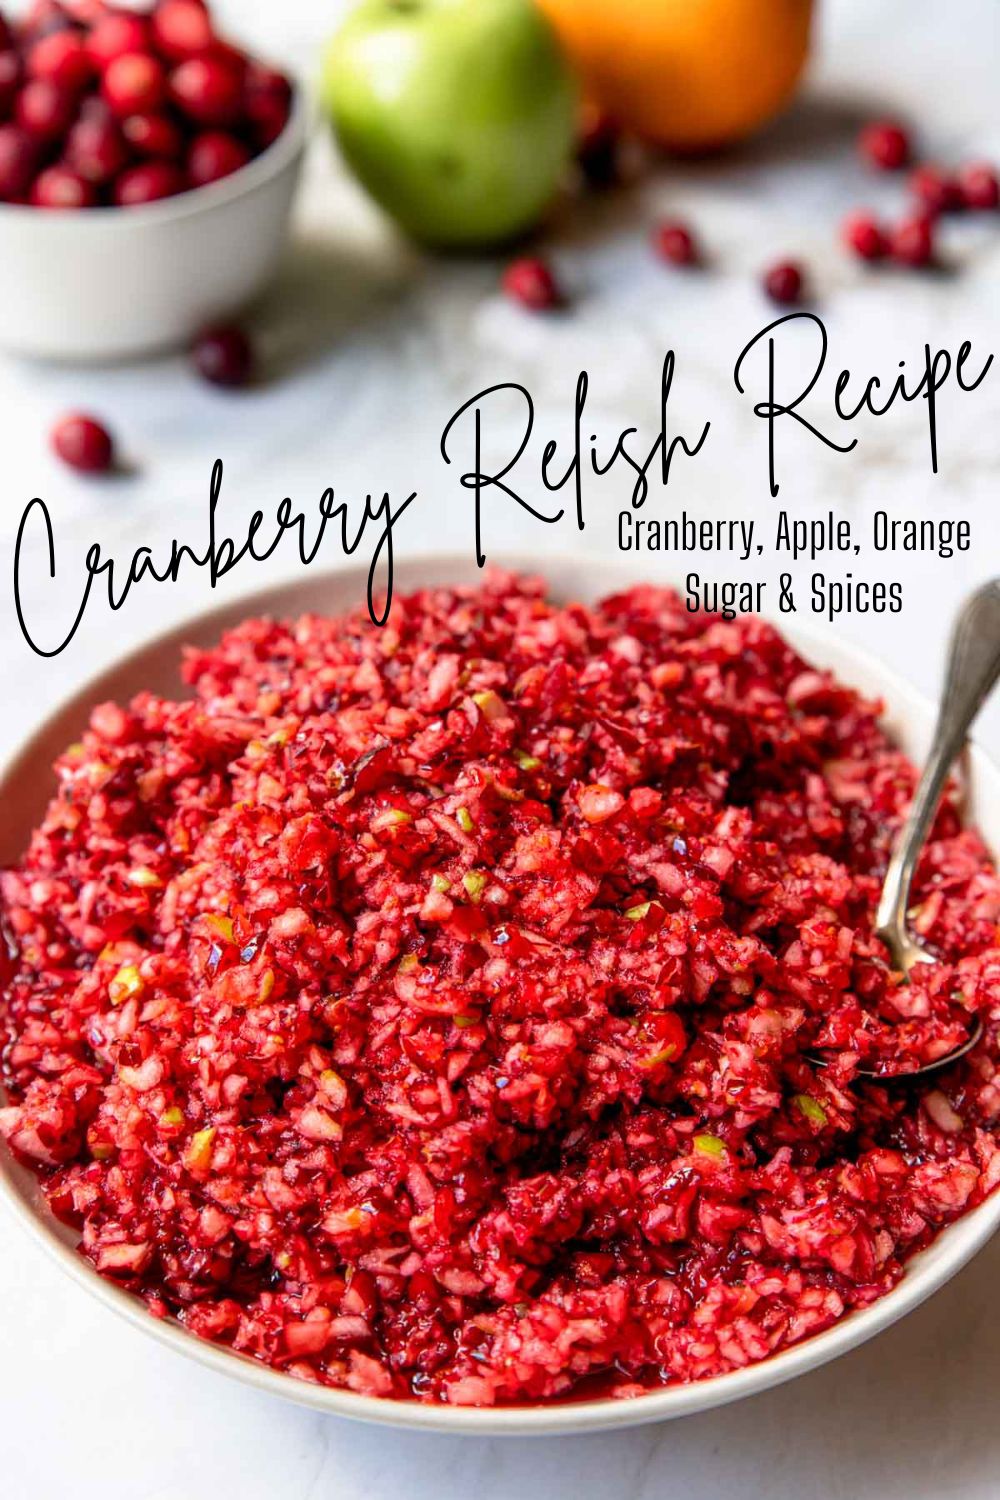 Pinterest image of cranberry relish with text overlay